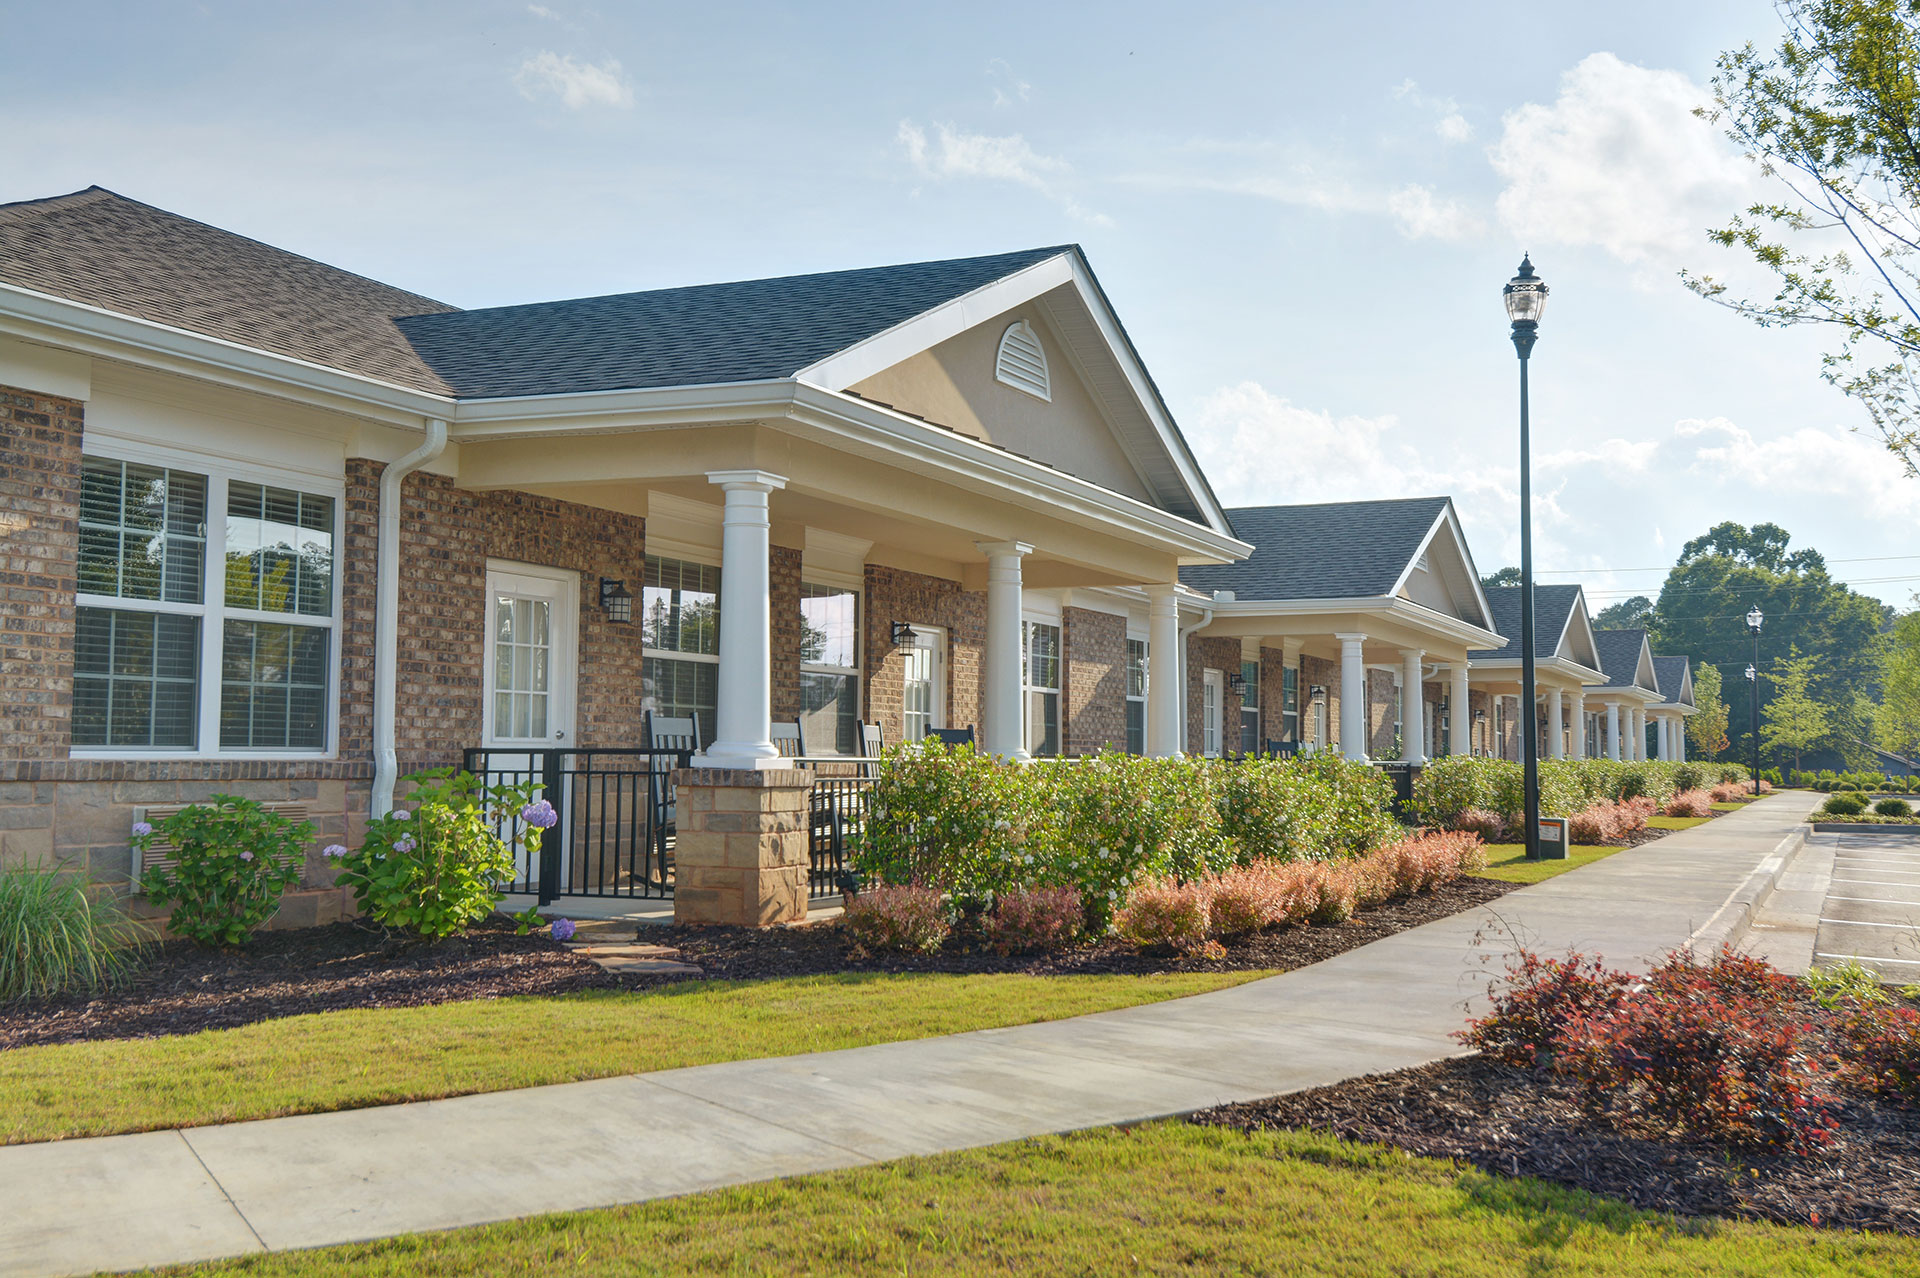 How to Find Senior Living Apartments in Woodstock